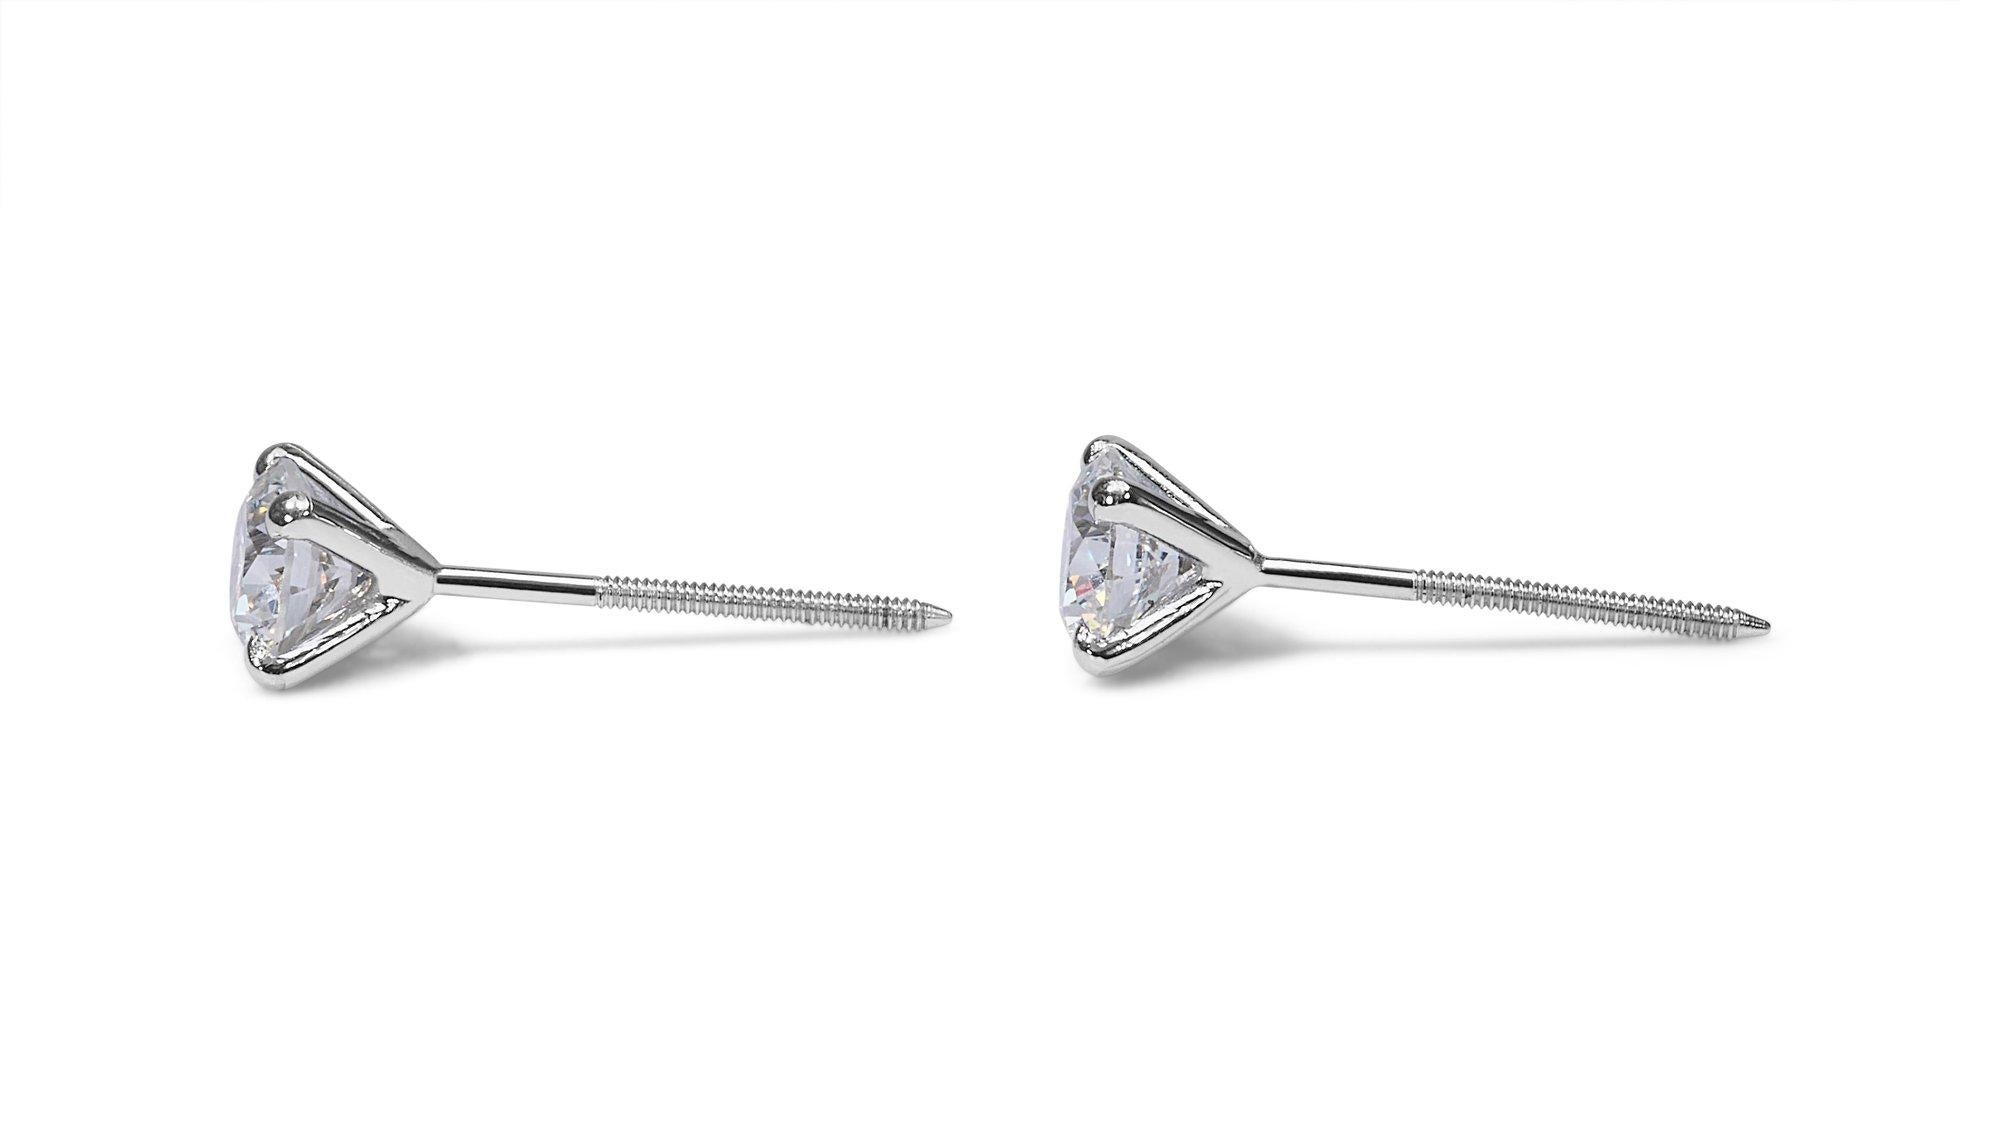 Exquisite 1.42ct Round Diamond Stud Earrings in 18k White Gold - GIA Certified For Sale 2